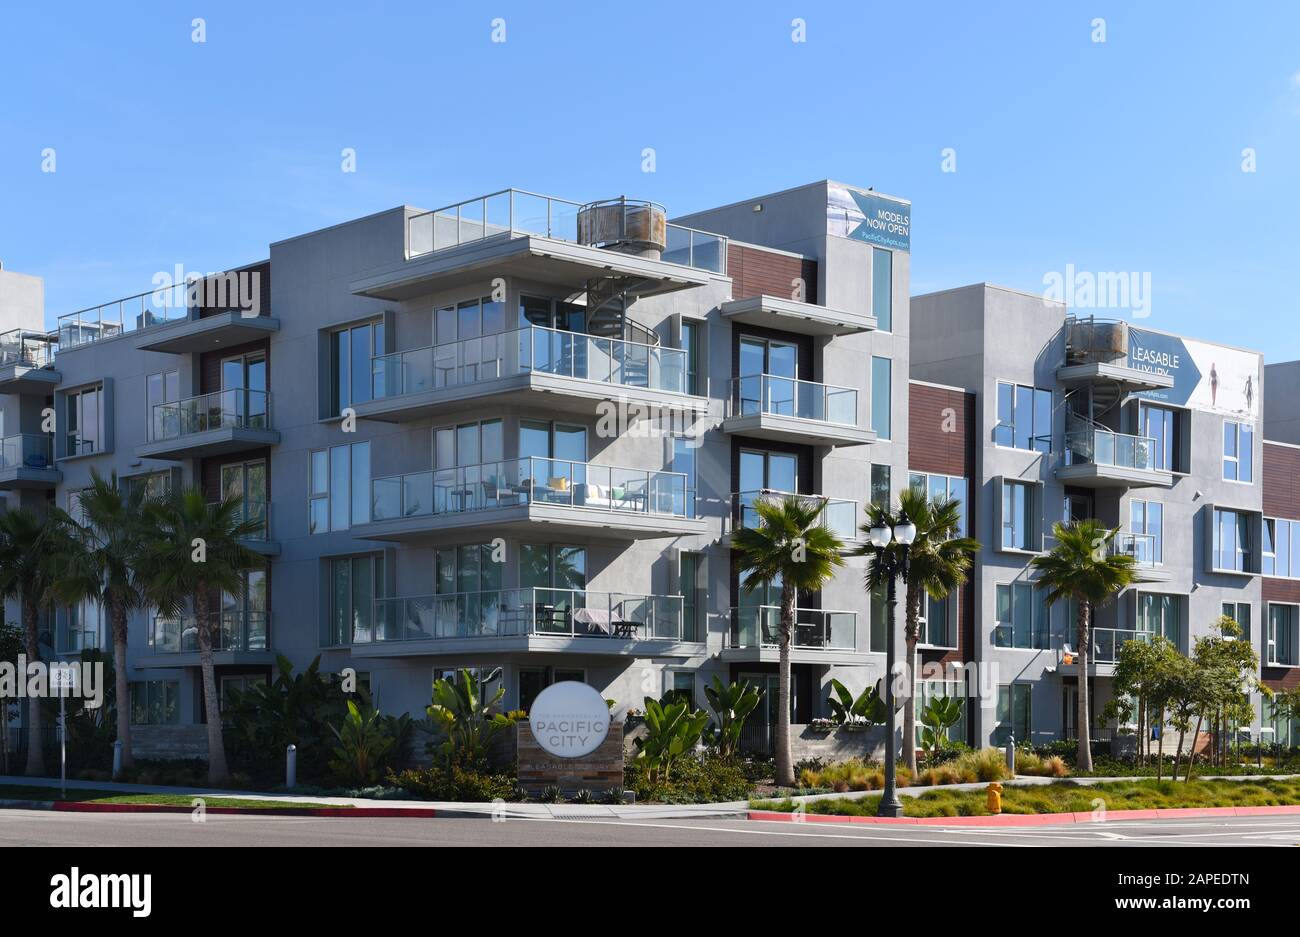 HUNTINGTON BEACH, CALIFORNIA - 22 JAN 2020: The Residences at Pacific City, luxury apartment and penthouses in Huntington Beach. Stock Photo